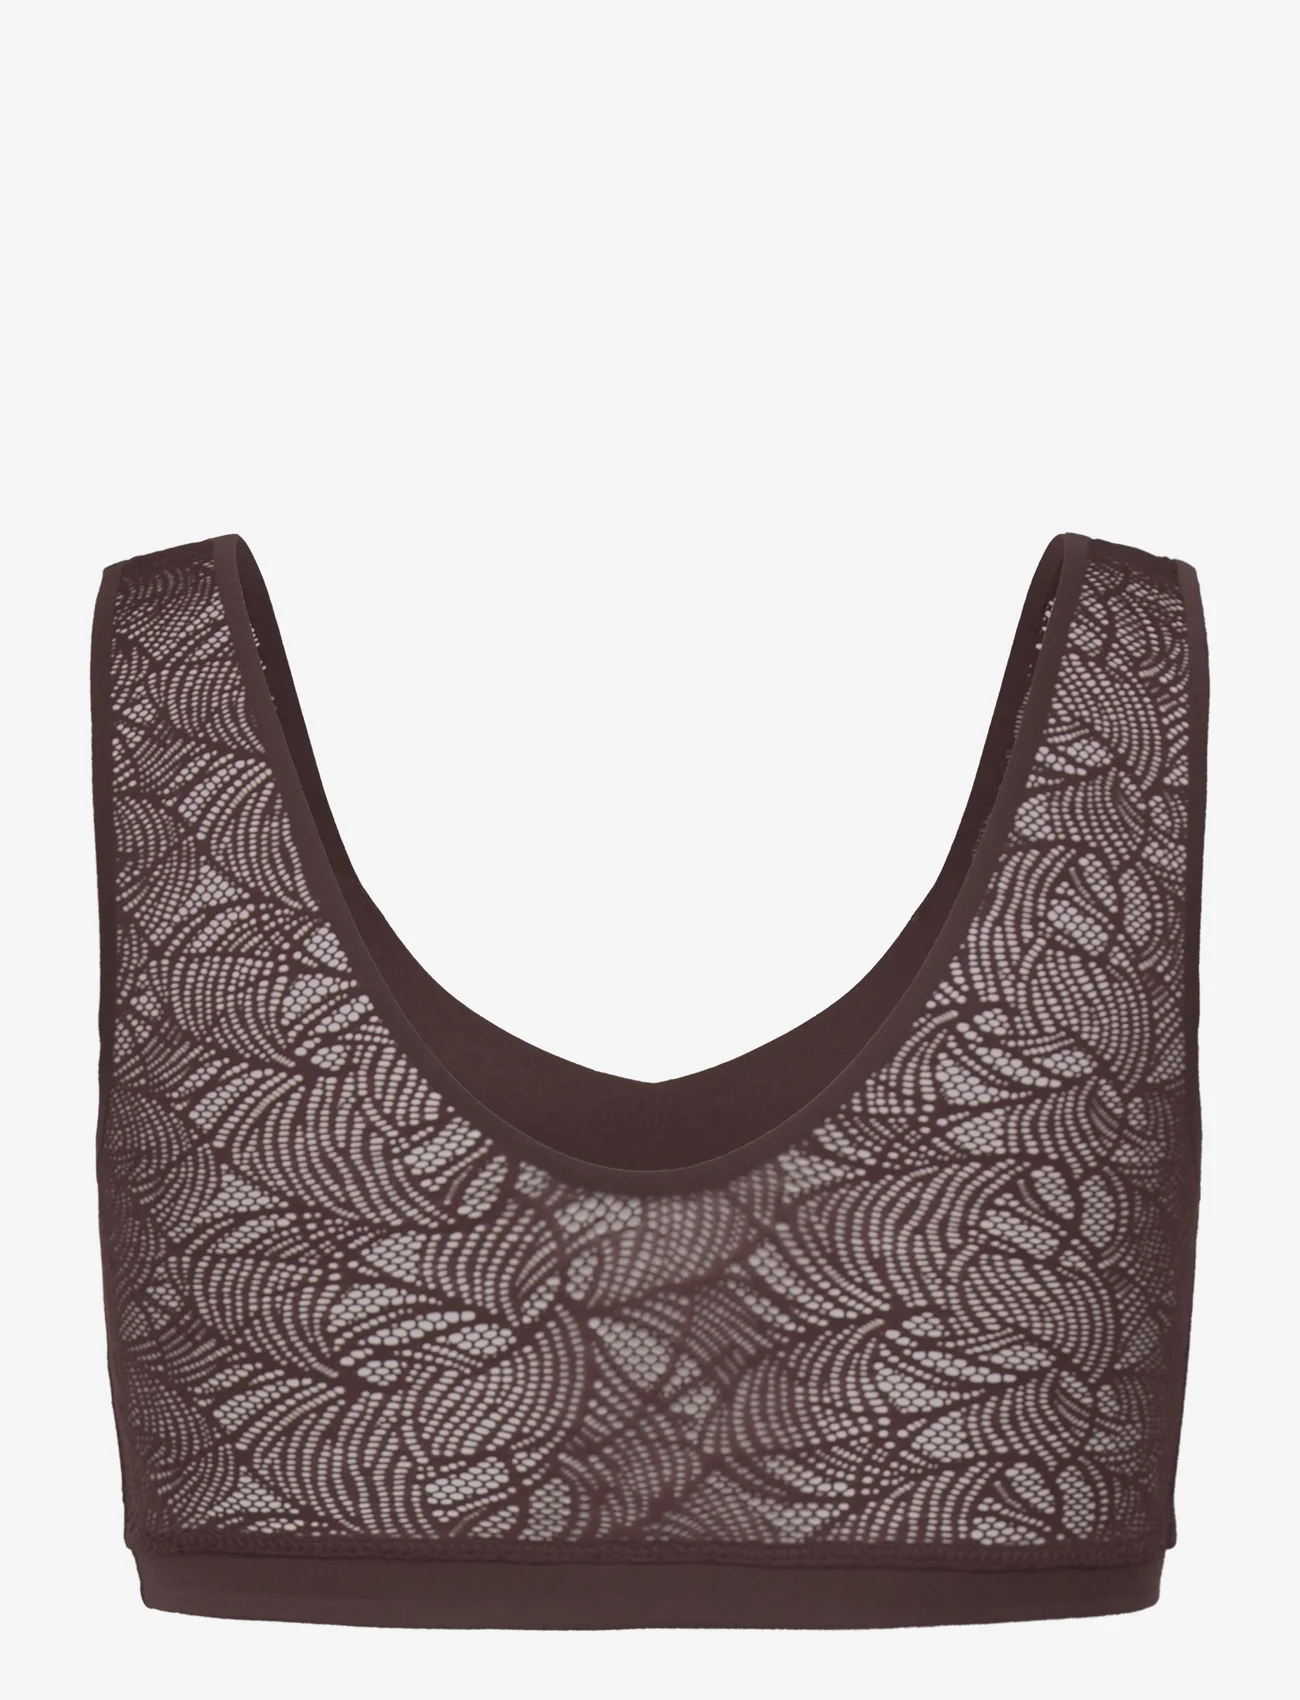 CHANTELLE - Soft Stretch Padded Lace Top - tank-top-bhs - brown - 1